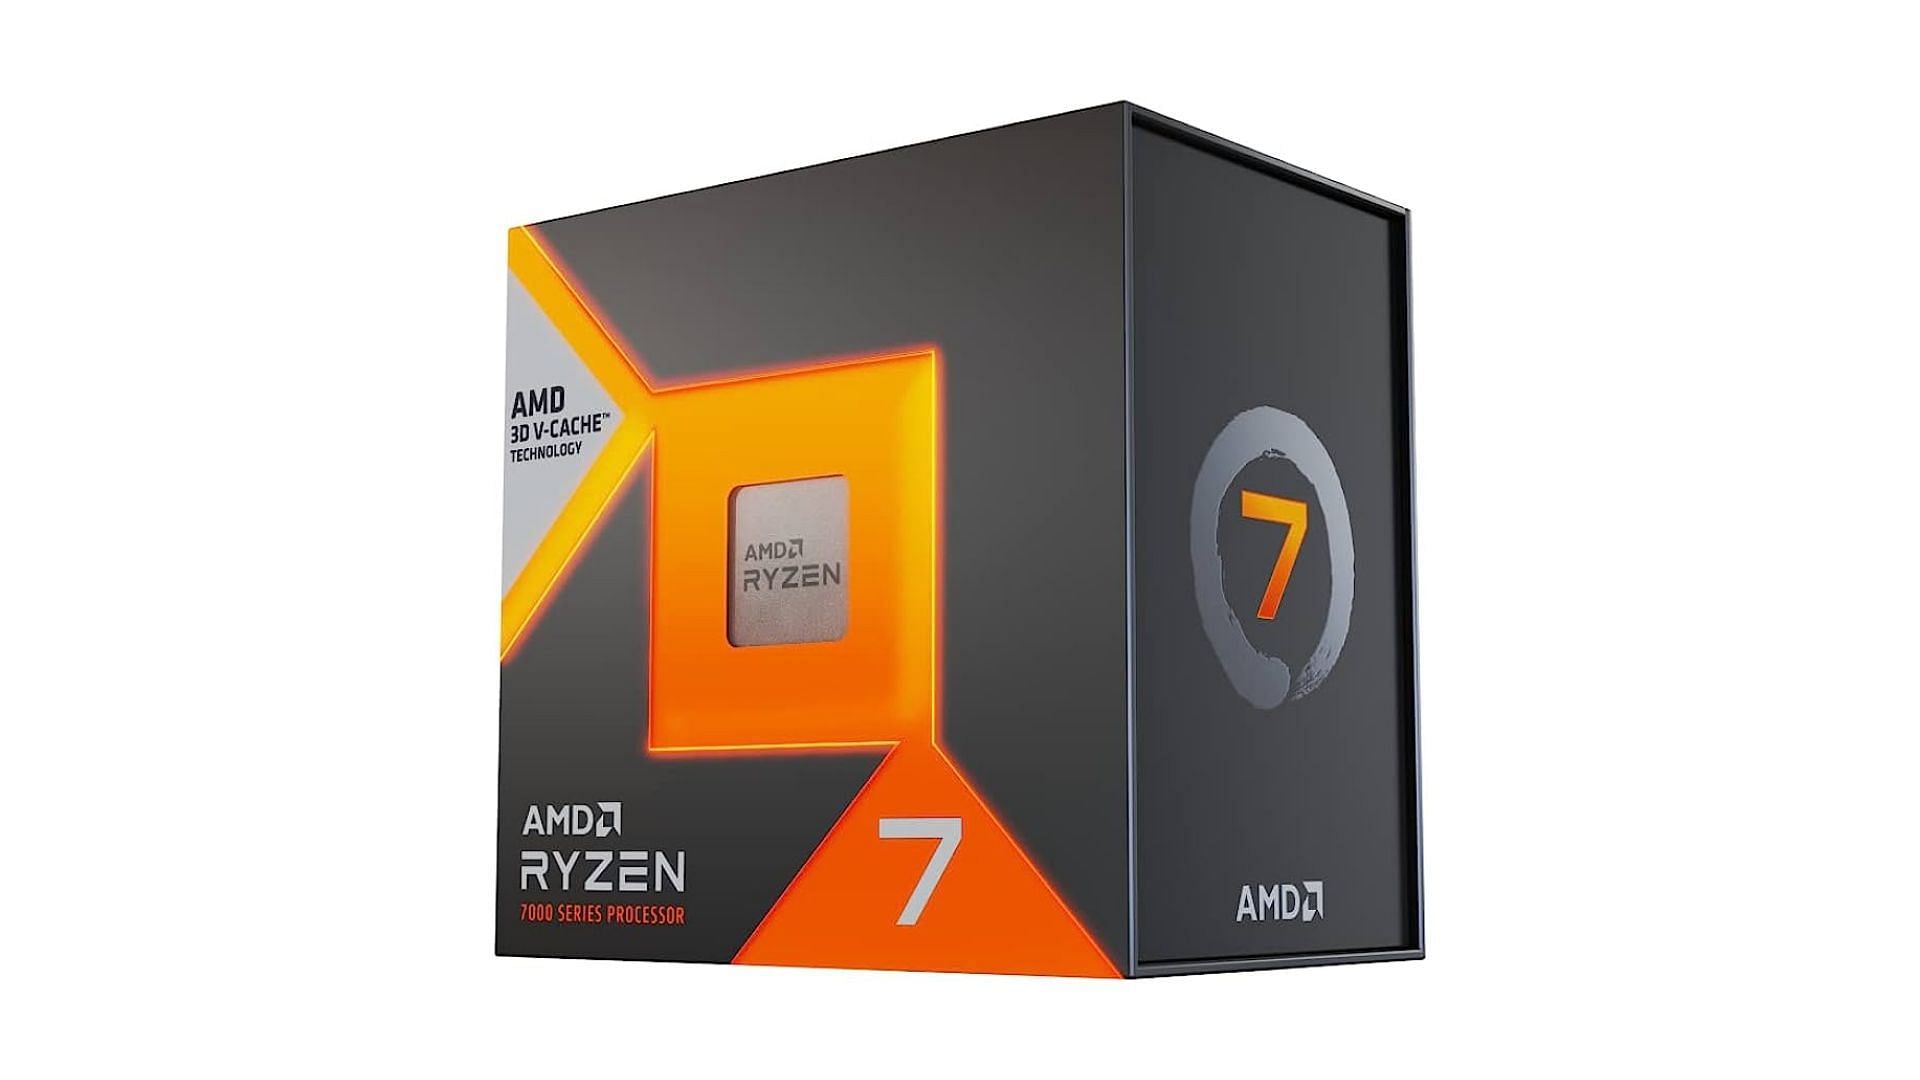 The AMD Ryzen 7 7800X3D is one of the best-selling CPUs today (Image via Amazon)